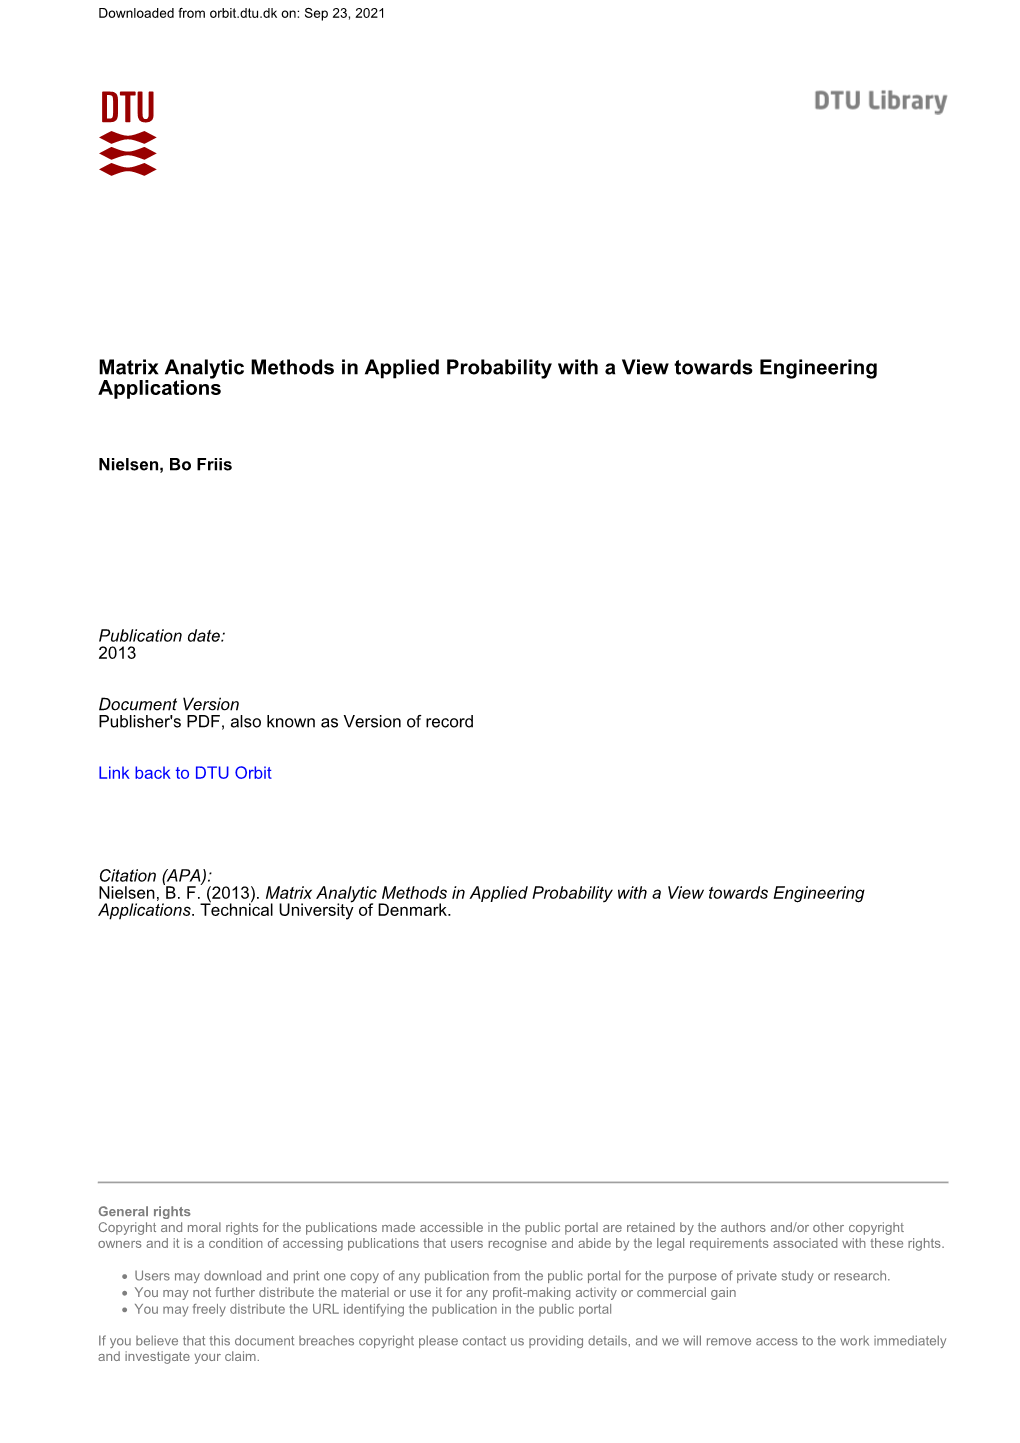 Matrix Analytic Methods in Applied Probability with a View Towards Engineering Applications